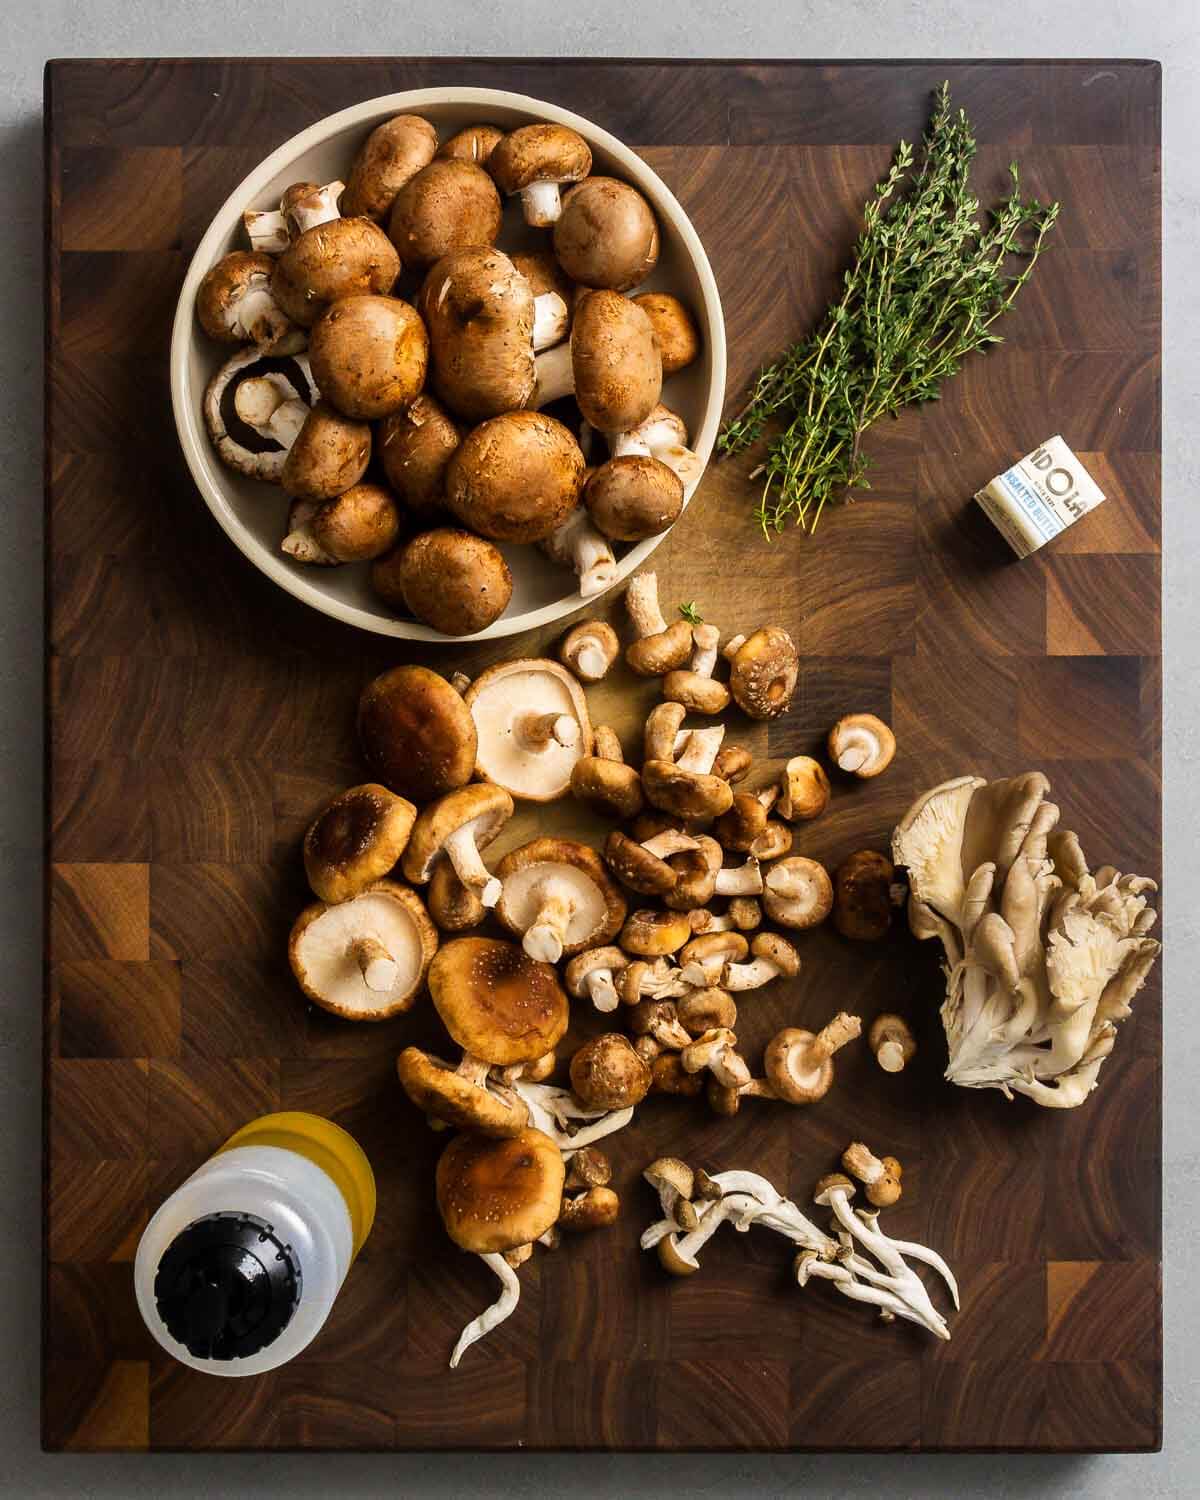 Ingredients shown: assorted mushrooms, thyme, butter, and olive oil.